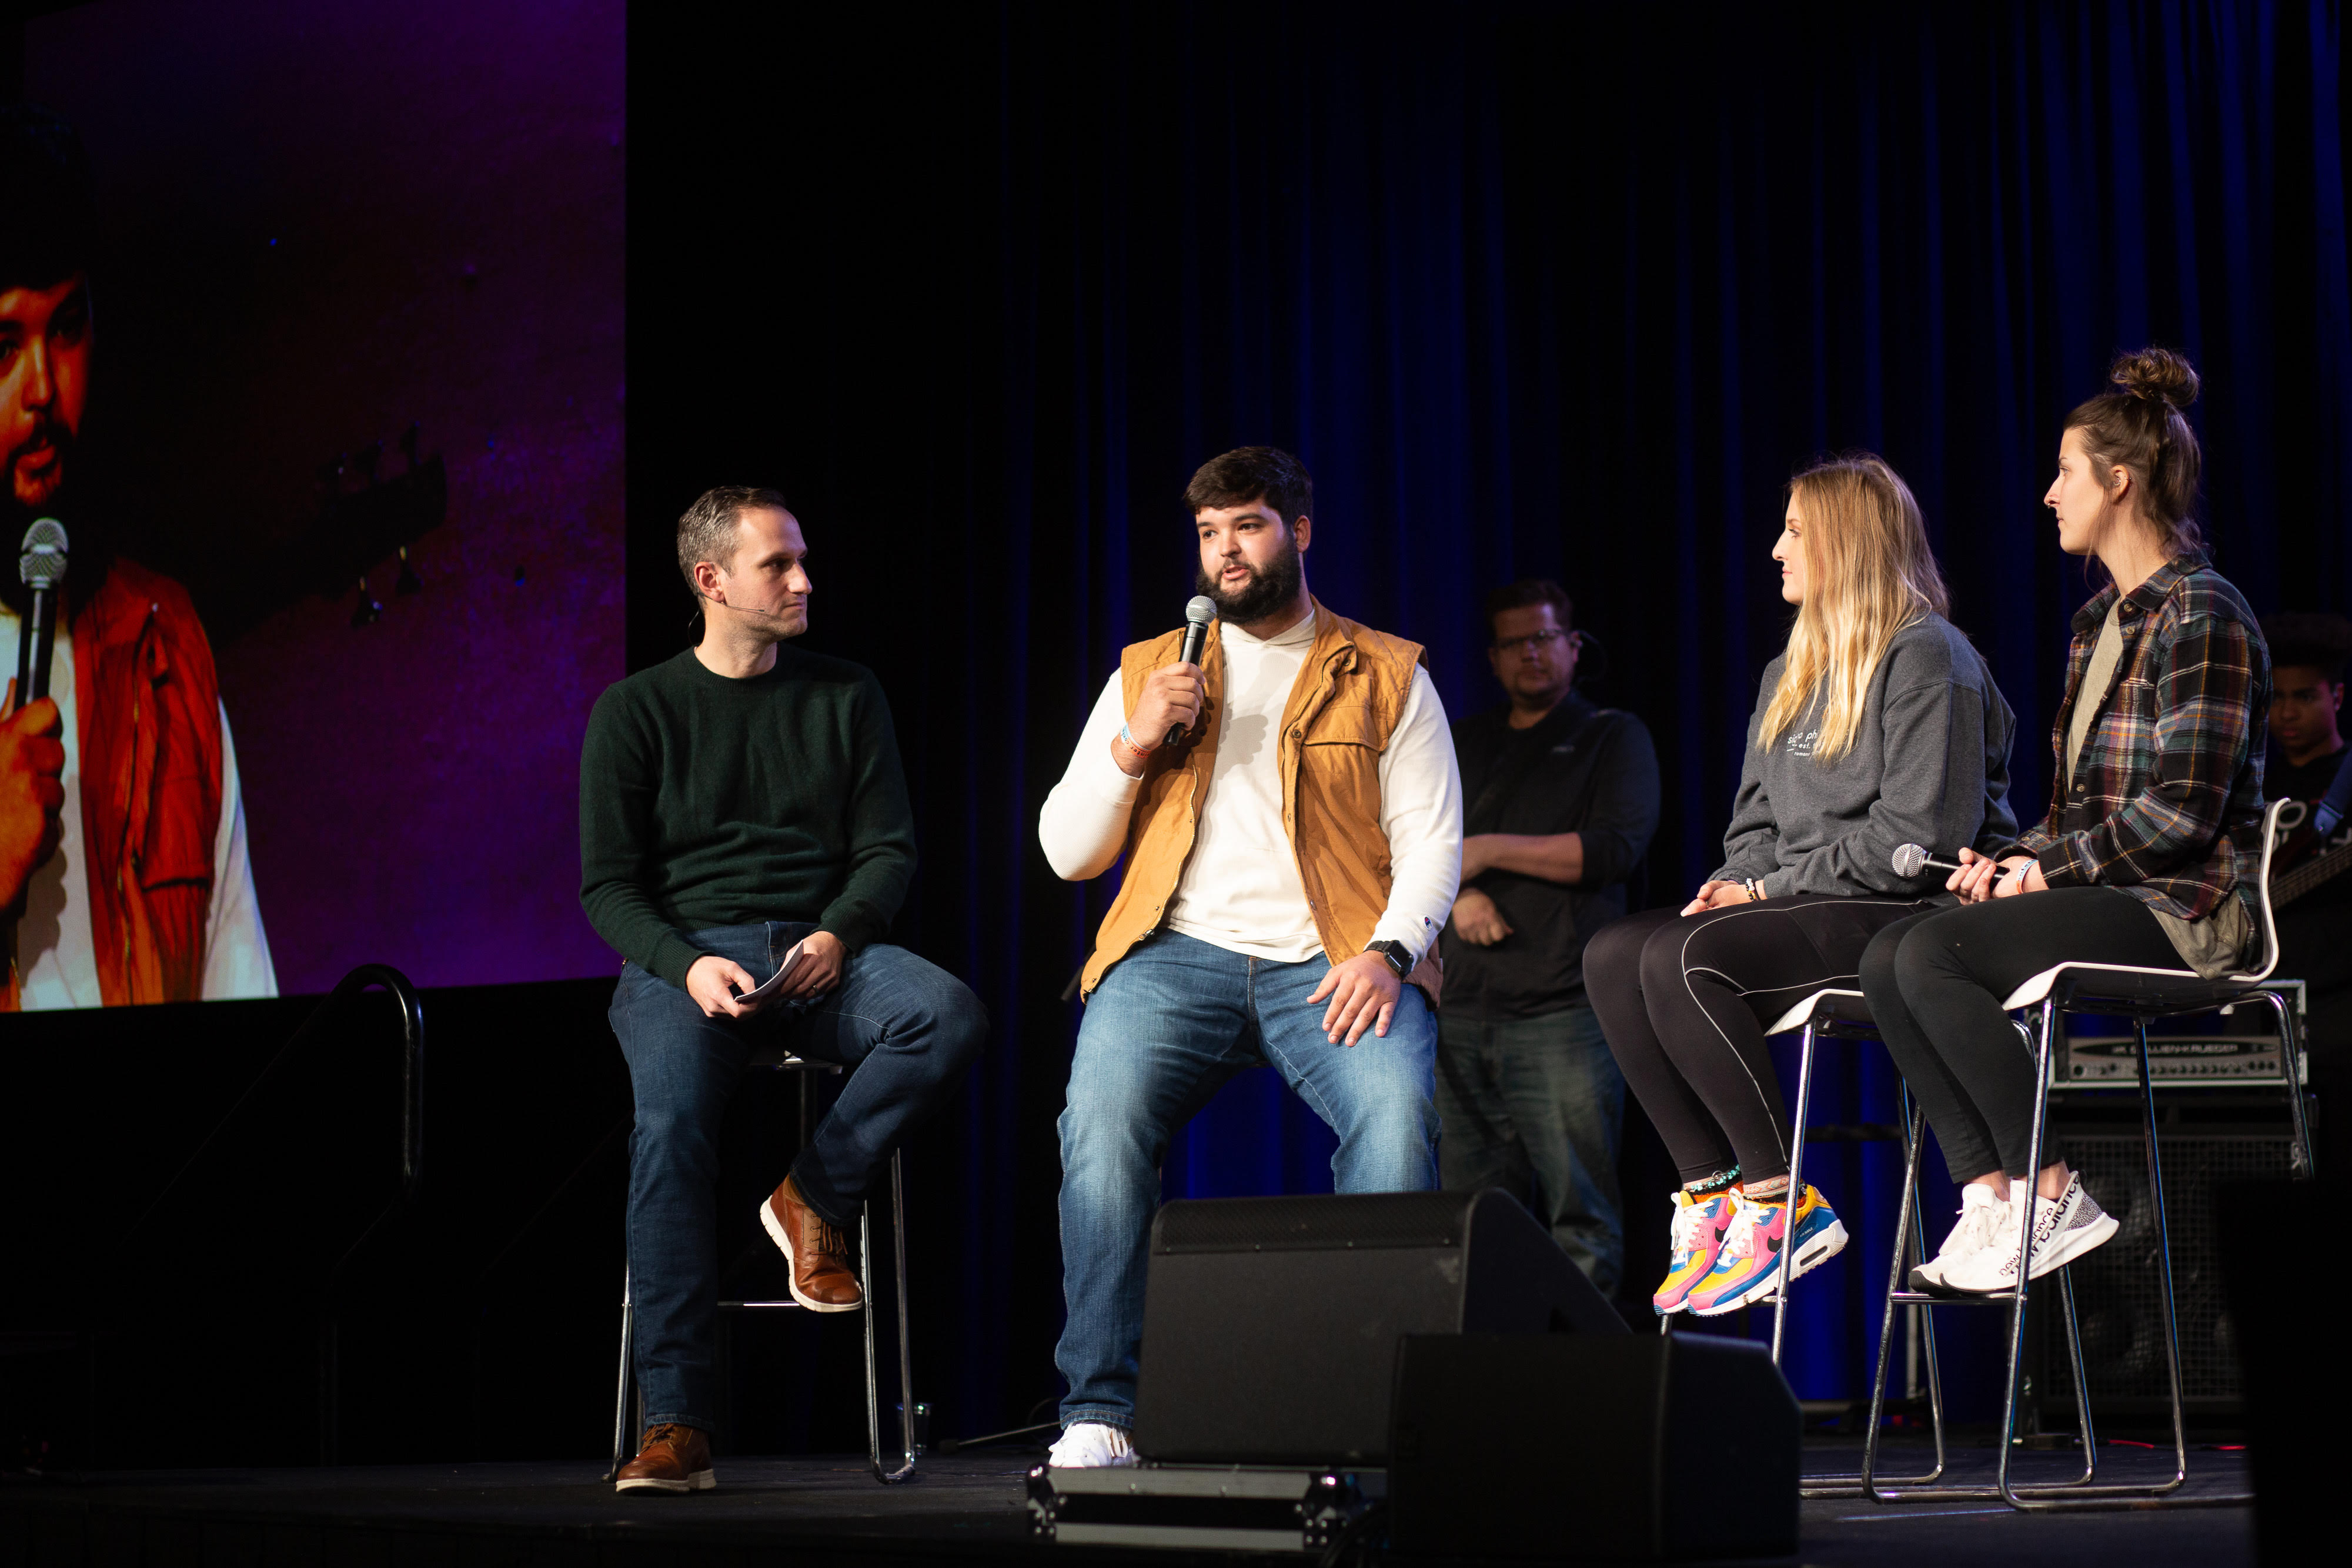 Four people sitting on high chairs on a stage, Connor, who is the second person from left, is holding a mic and speaking into it.